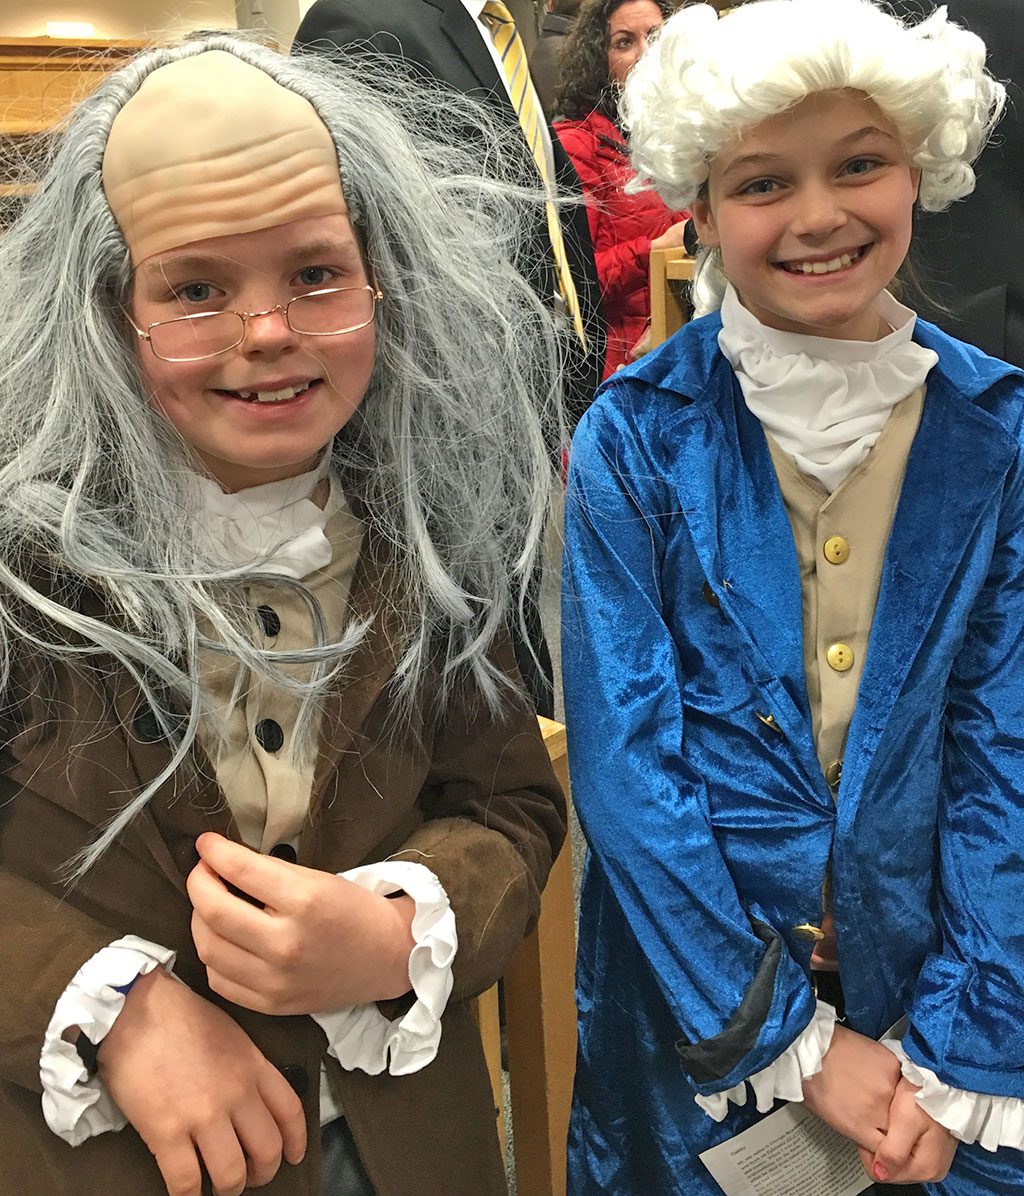 TWO of the country's Founding Fathers, Benjamin Franklin (Drew Damiani) and George Washington (Gabby Jacobs) made a rare appearance at last week's School Committee meeting during which a few students from each school presented a recent project. Damiani and Jacobs presented their fifth-grade project on historical figures and were part of the living wax museum event held recently at LMS. (Courtesy Photo)